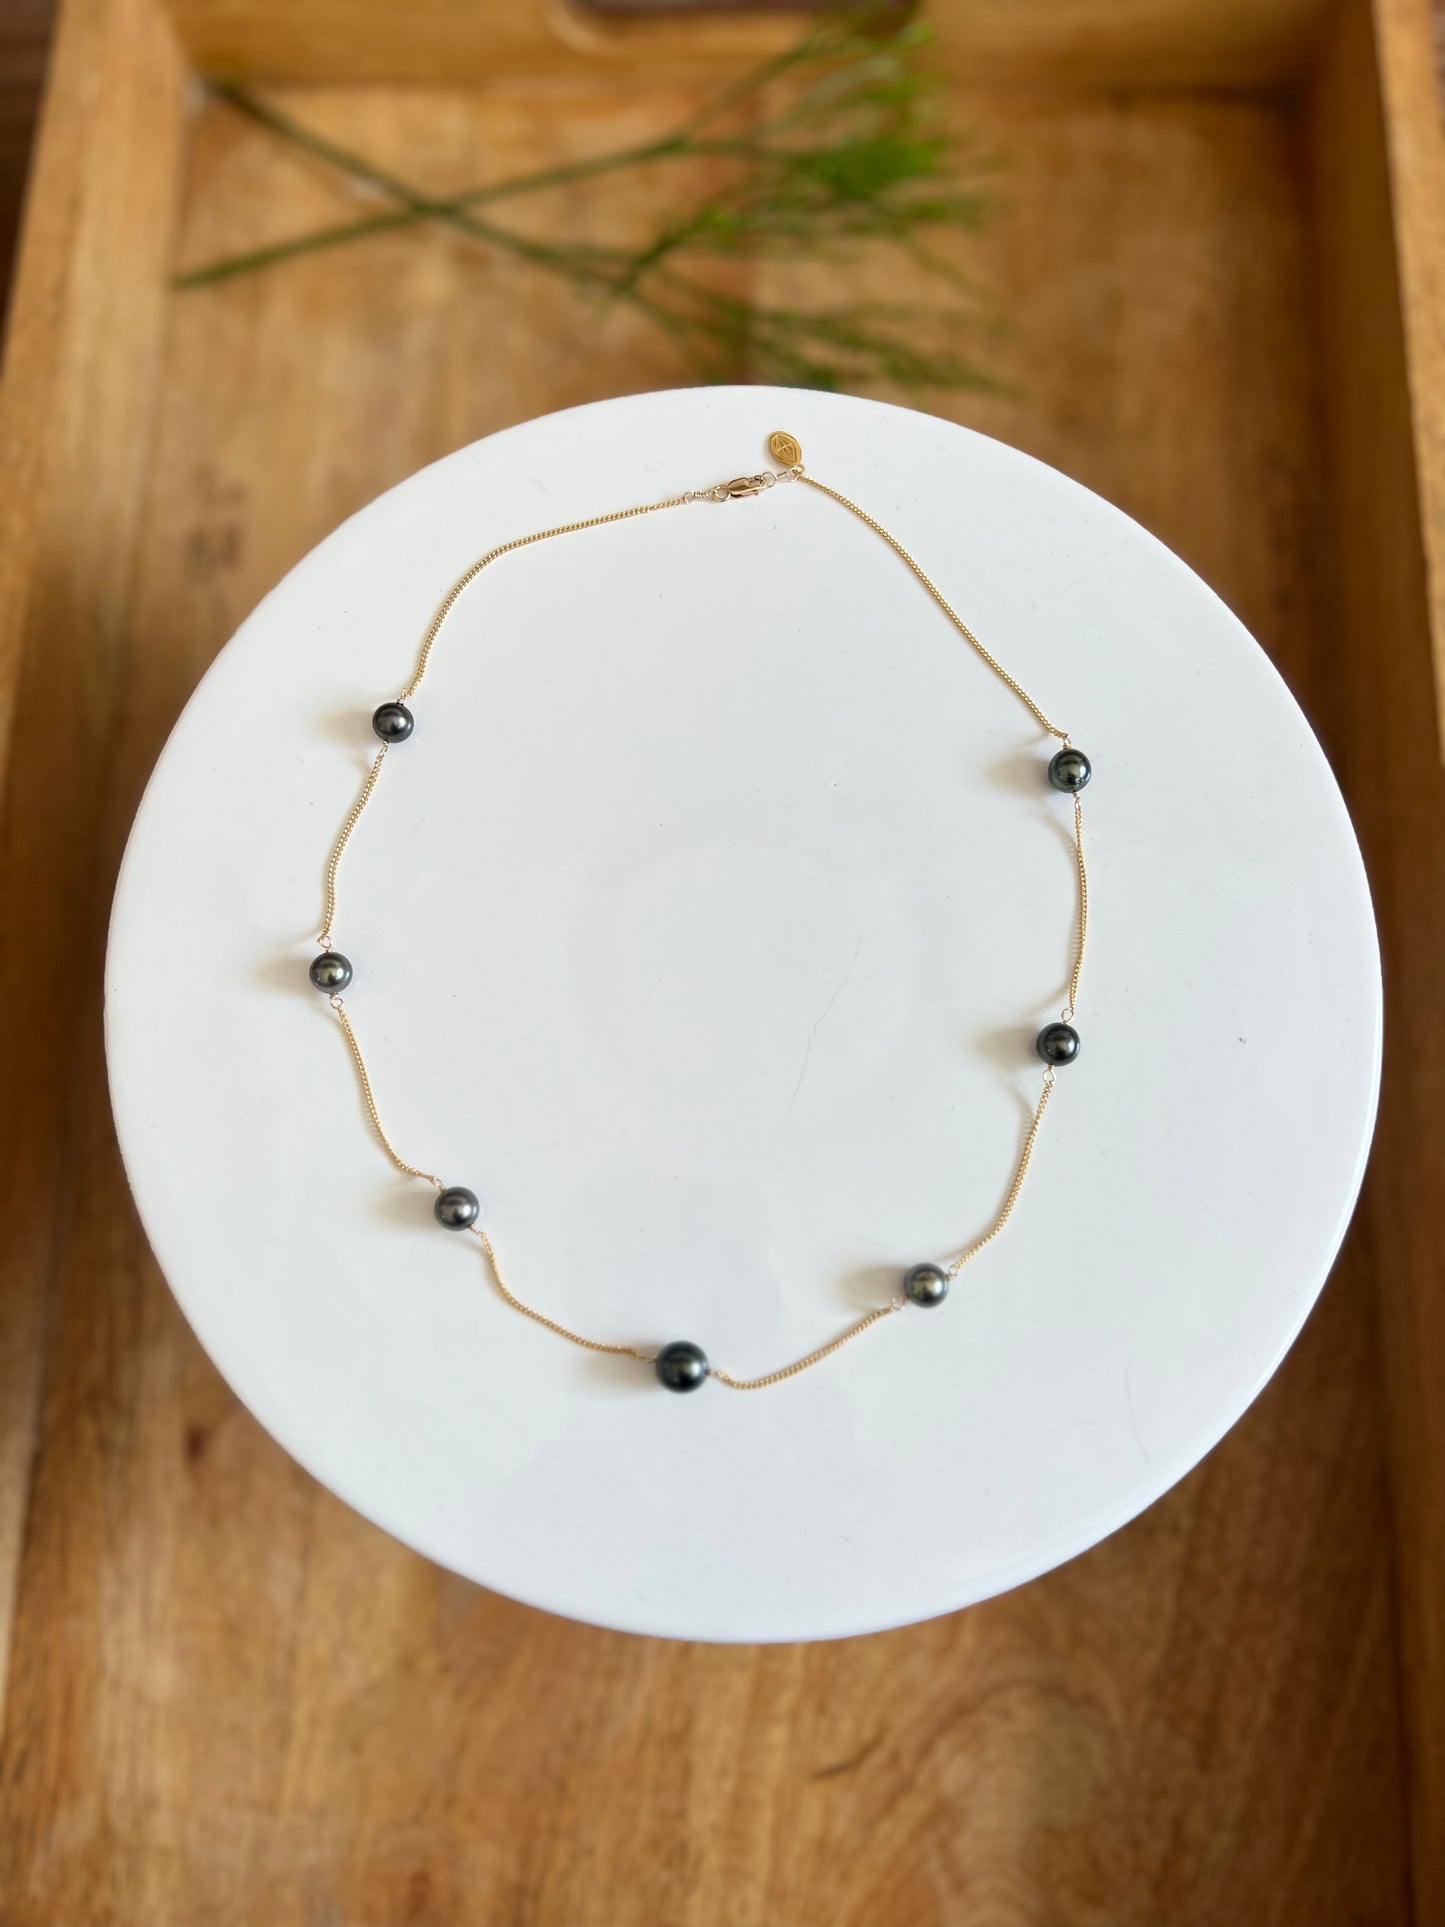 Dahlia necklace with 7 mini Tahitian pearls